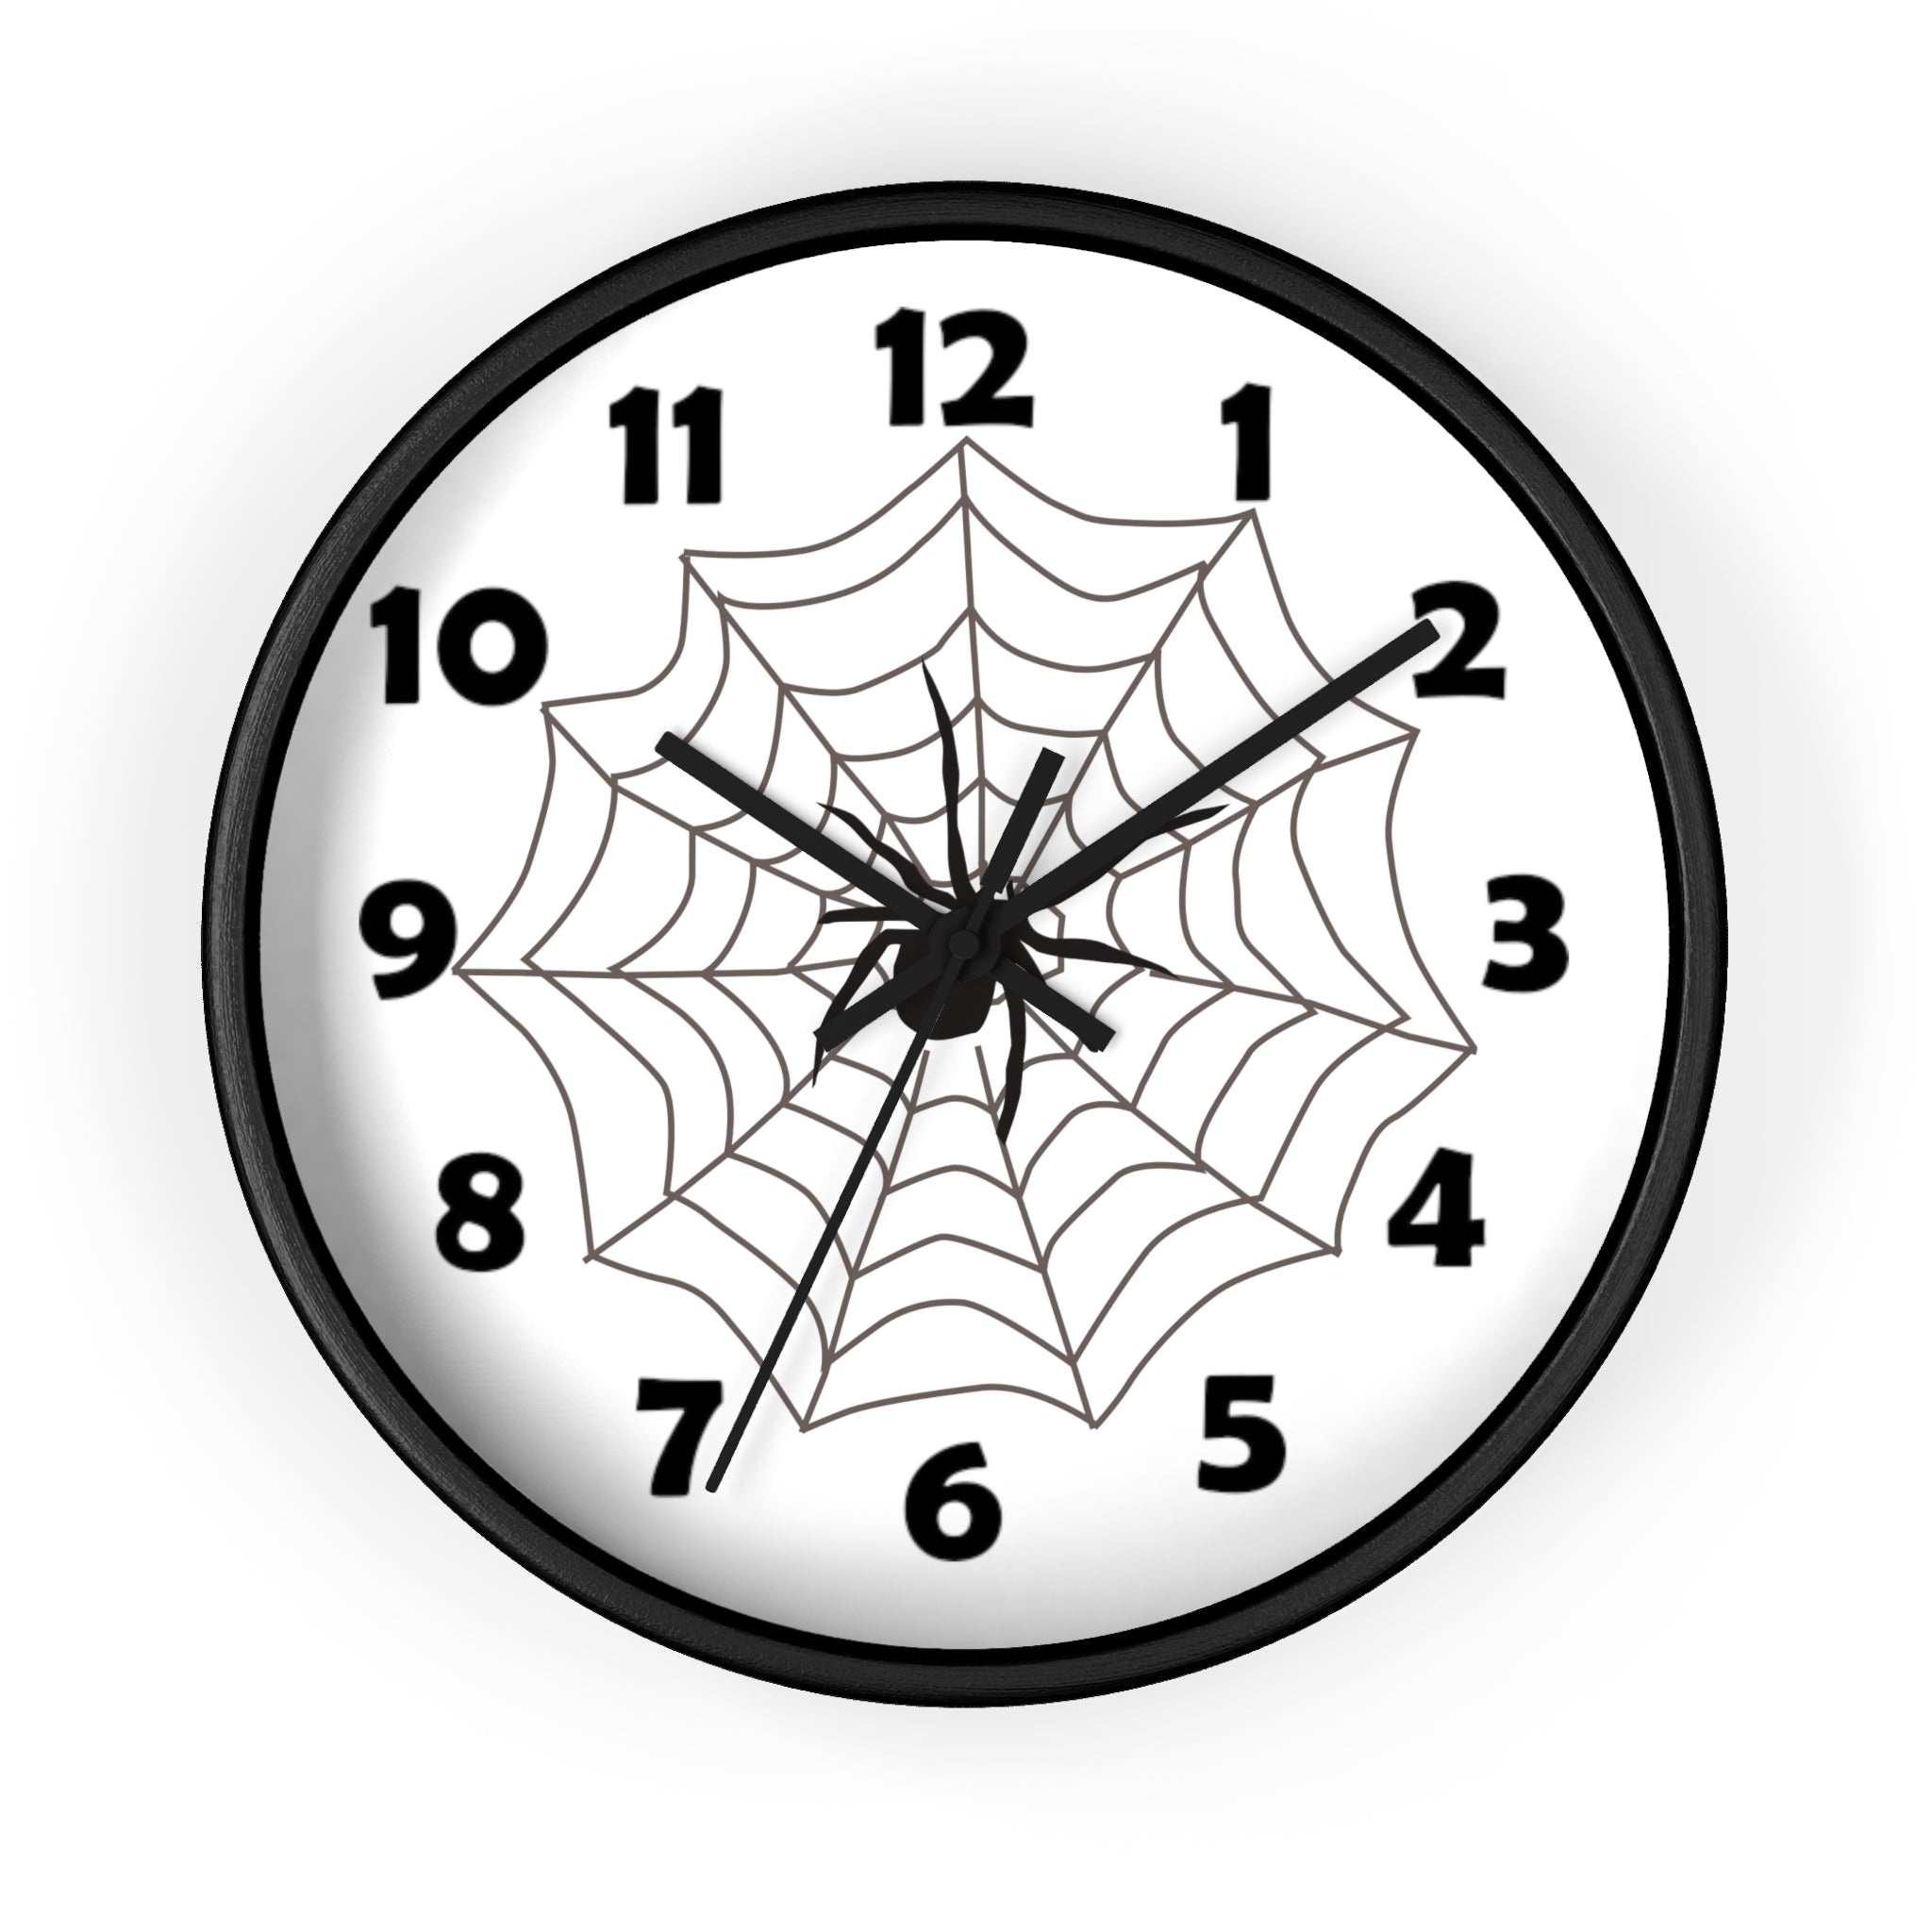 10 inch round wall clock featuring a spider in a web